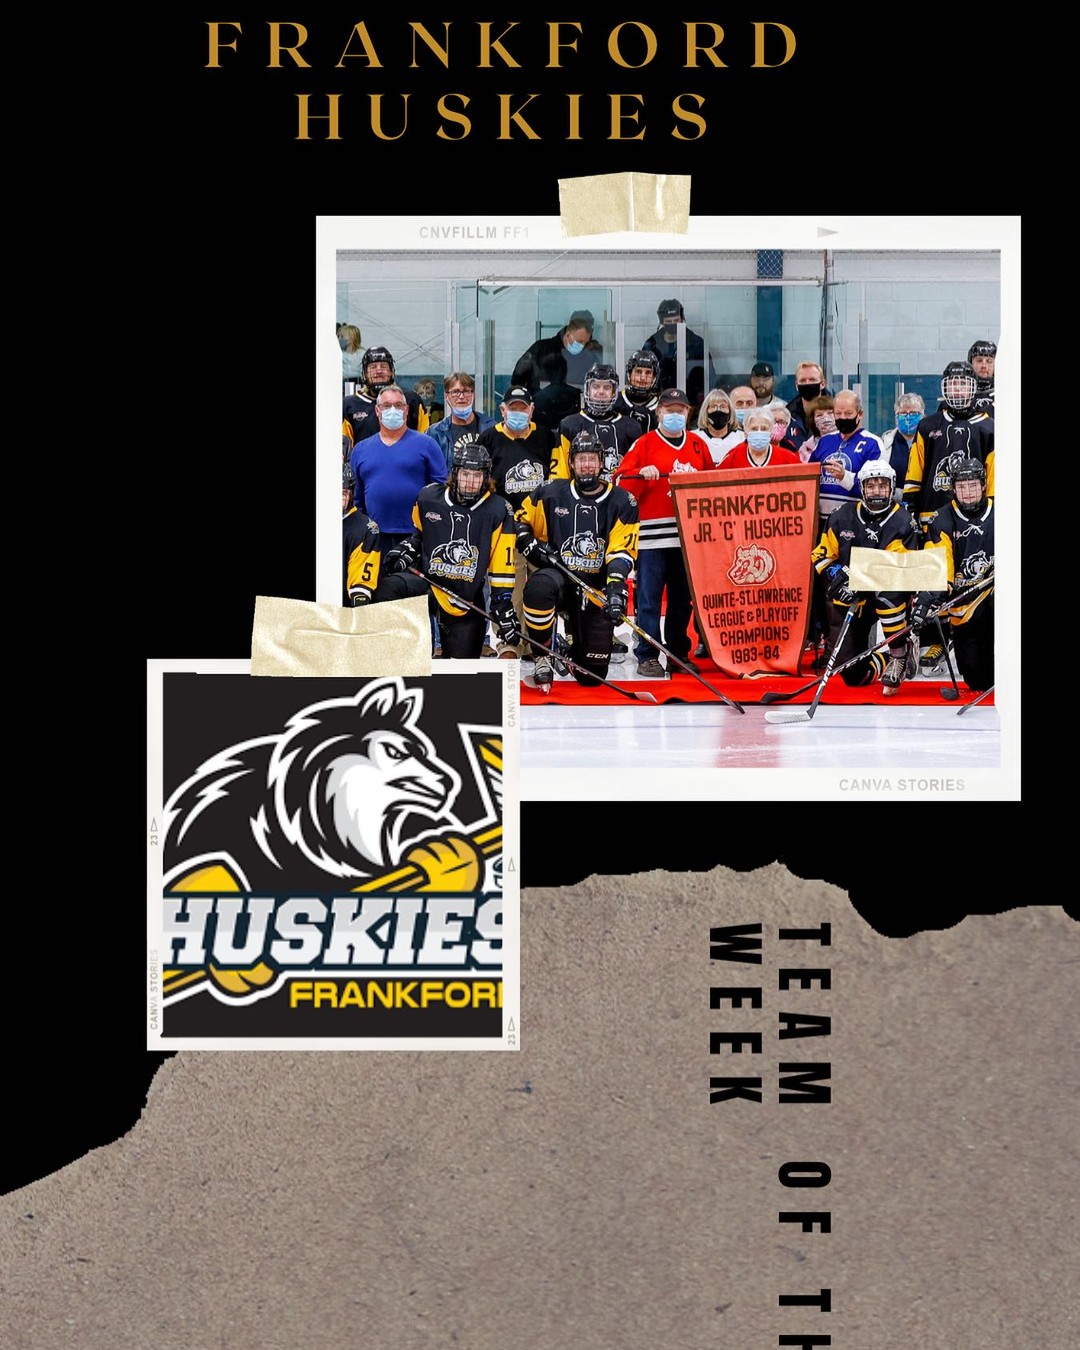 The Frankford Huskies were reborn in 2021, after decades away from junior hockey.  The players, ownership, volunteers, and knowledgeable fan base understand what it takes to win, and are excited to see the growth and process the club is on this season, with a multi-year goal of becoming champions. 

The very young group of men will be in the PJ for a long time, and we are excited to see what they will be able to accomplish.

(Photo Credit: Deroche Sports Photography)